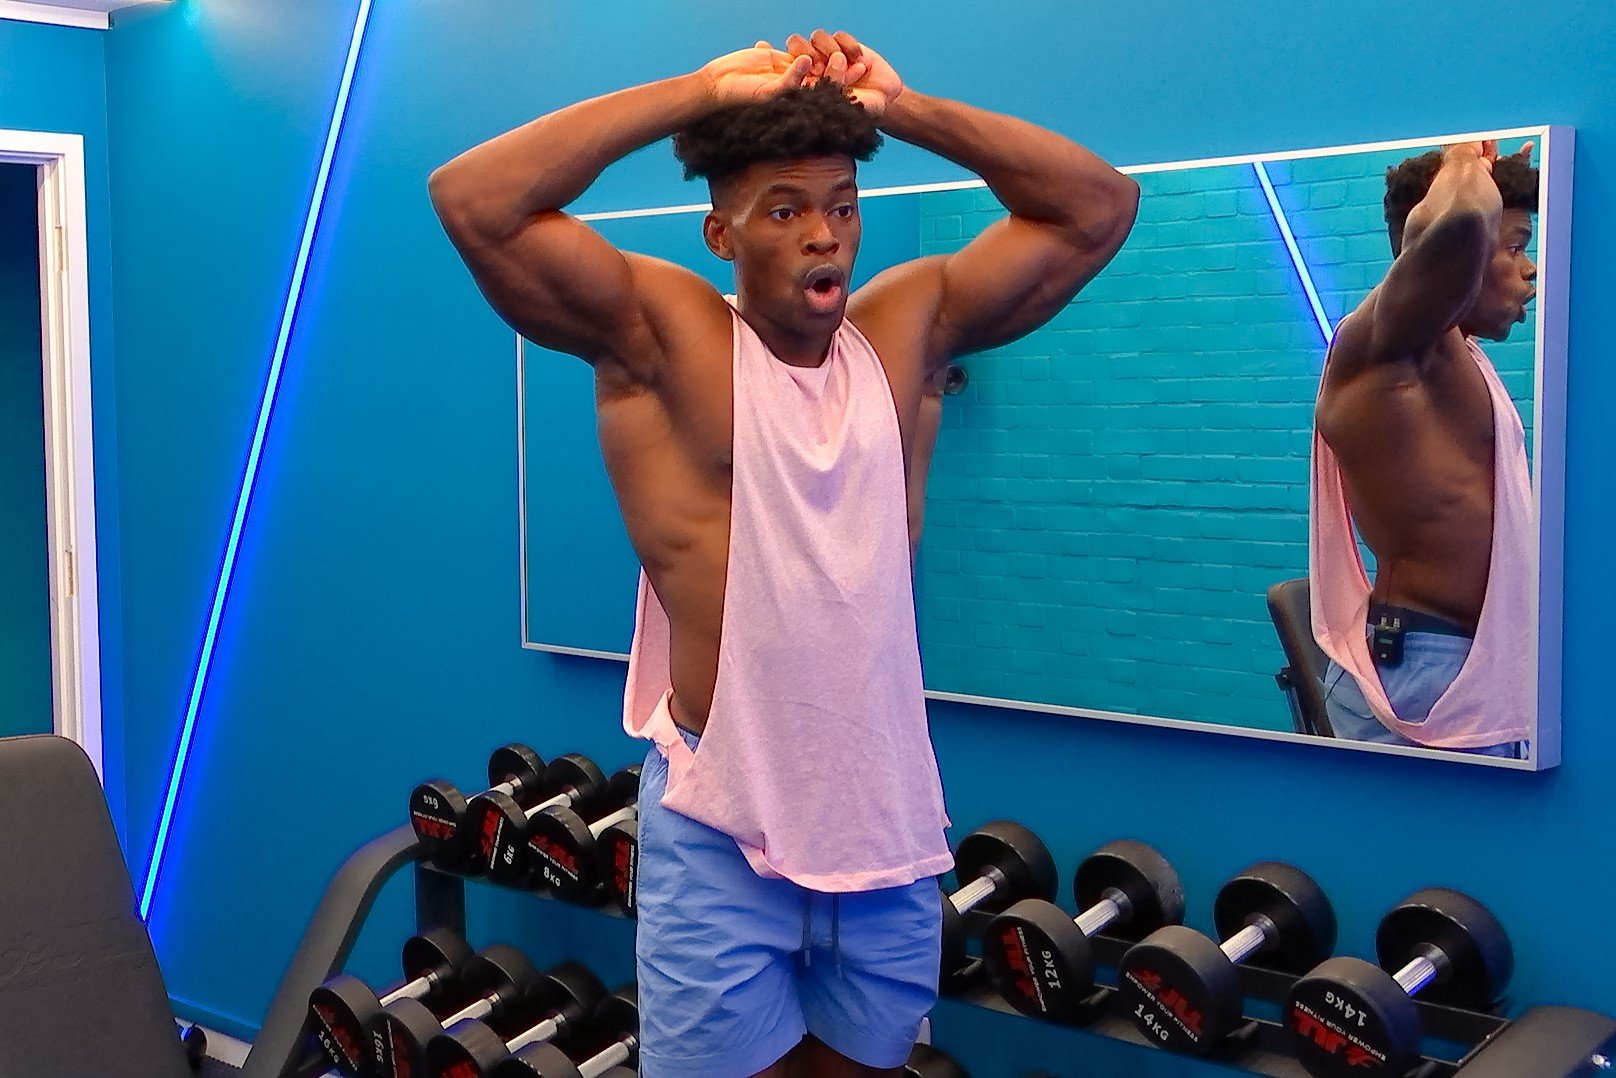 Marvin Achi, who is a part of the cast of 'The Circle' Season 5 on Netflix, wears a light pink tank top and blue shorts.